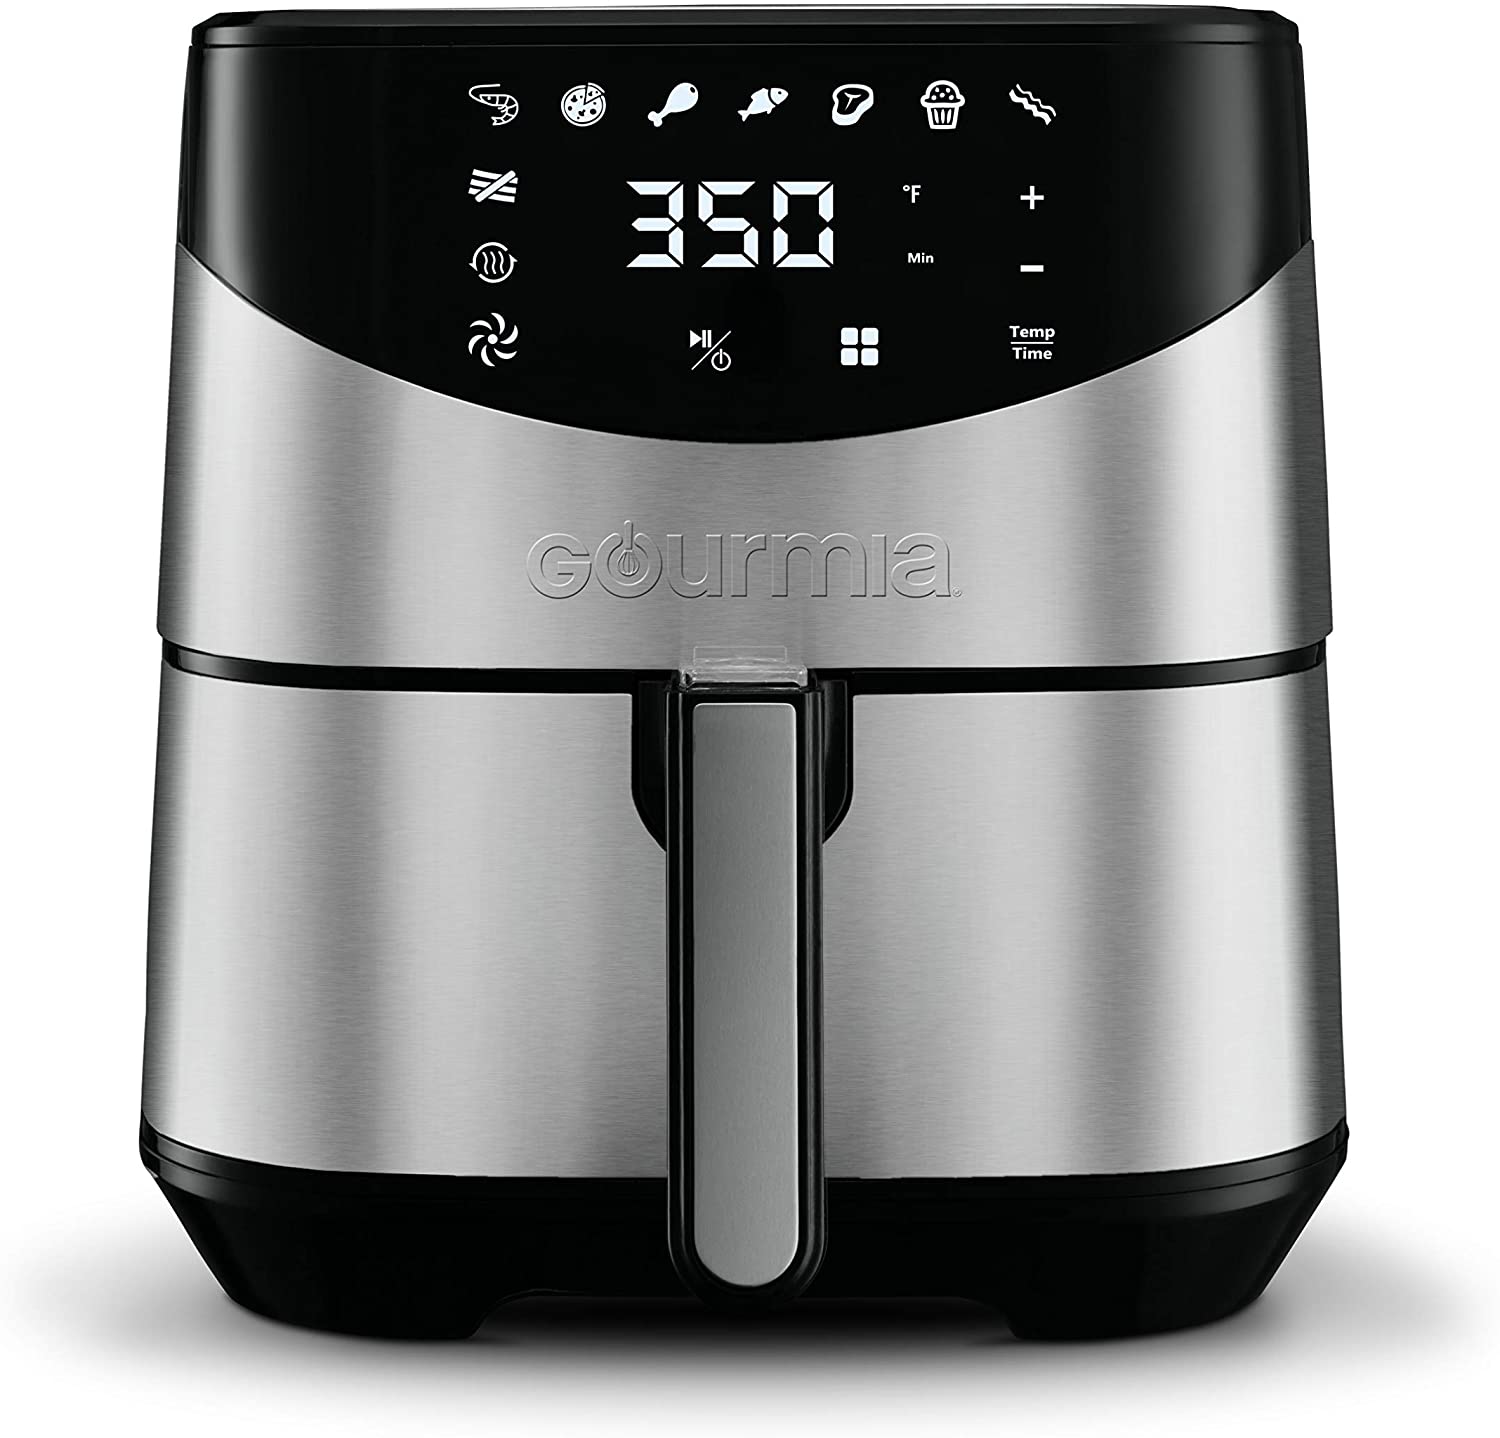 Gourmia 6 Qt Digital Air Fryer with Guided Cooking and 12 One-Touch Cooking  Functions, 13.58 H, New 